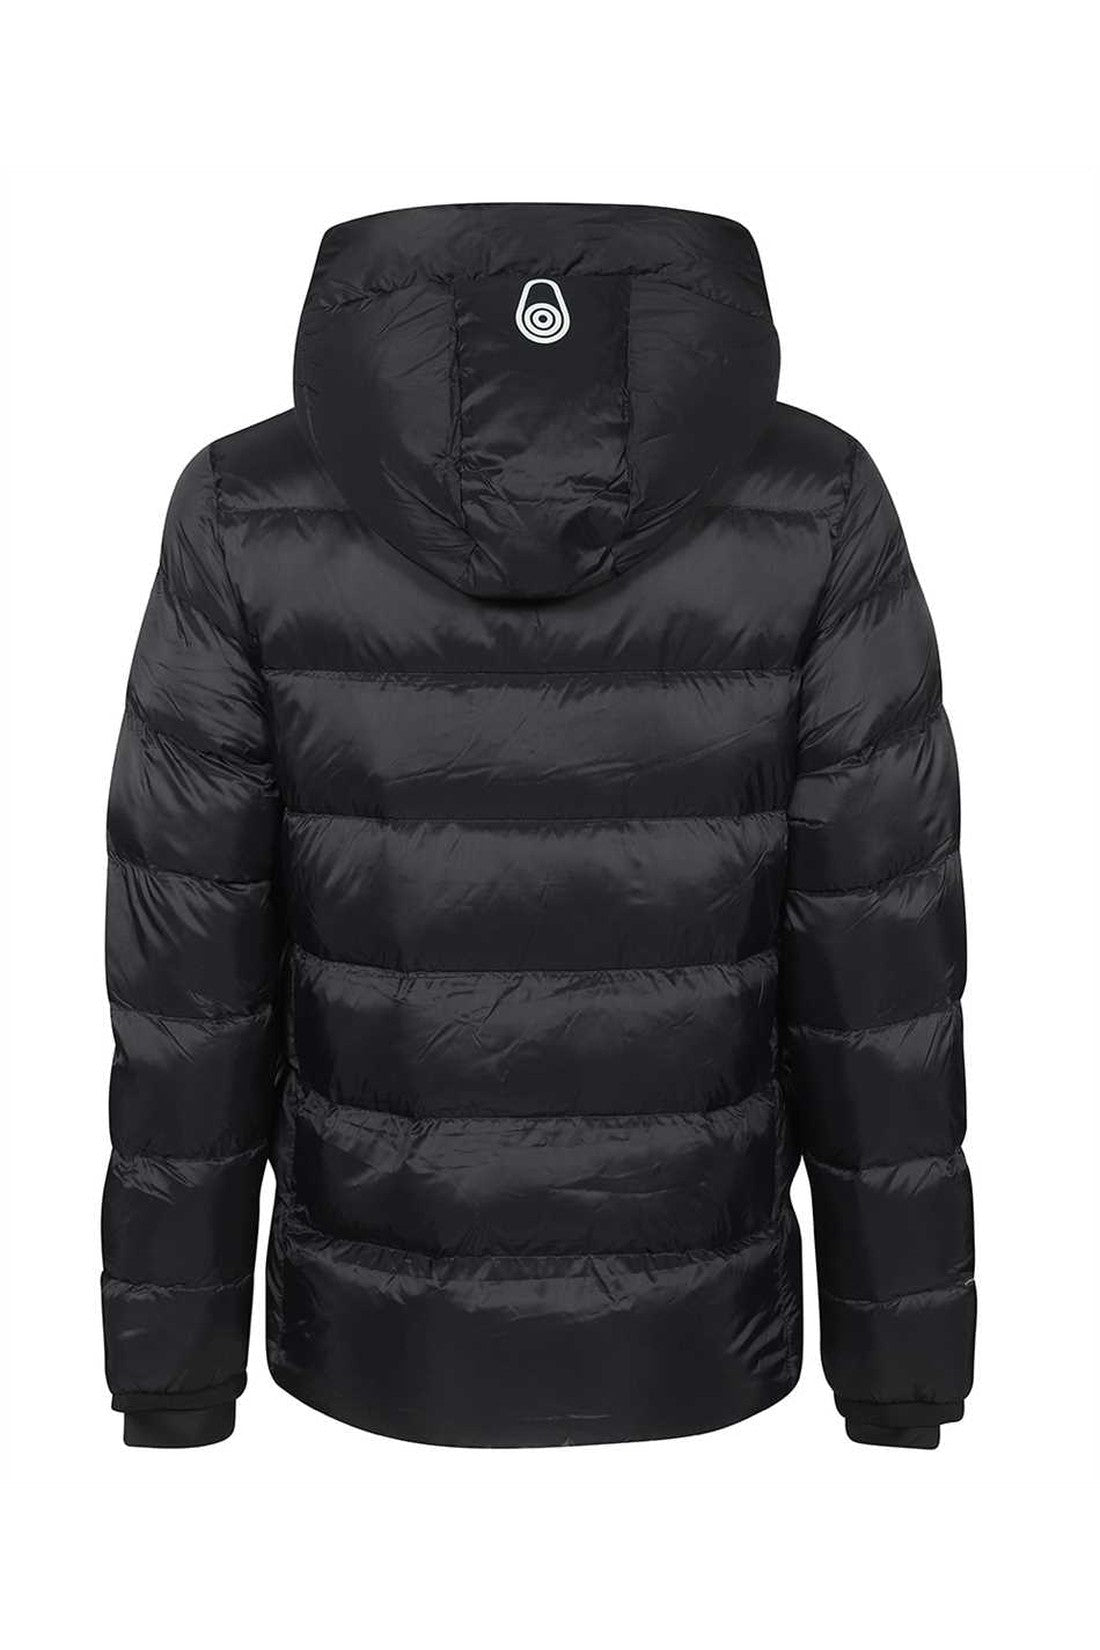 Hooded down jacket-Sail Racing-OUTLET-SALE-ARCHIVIST